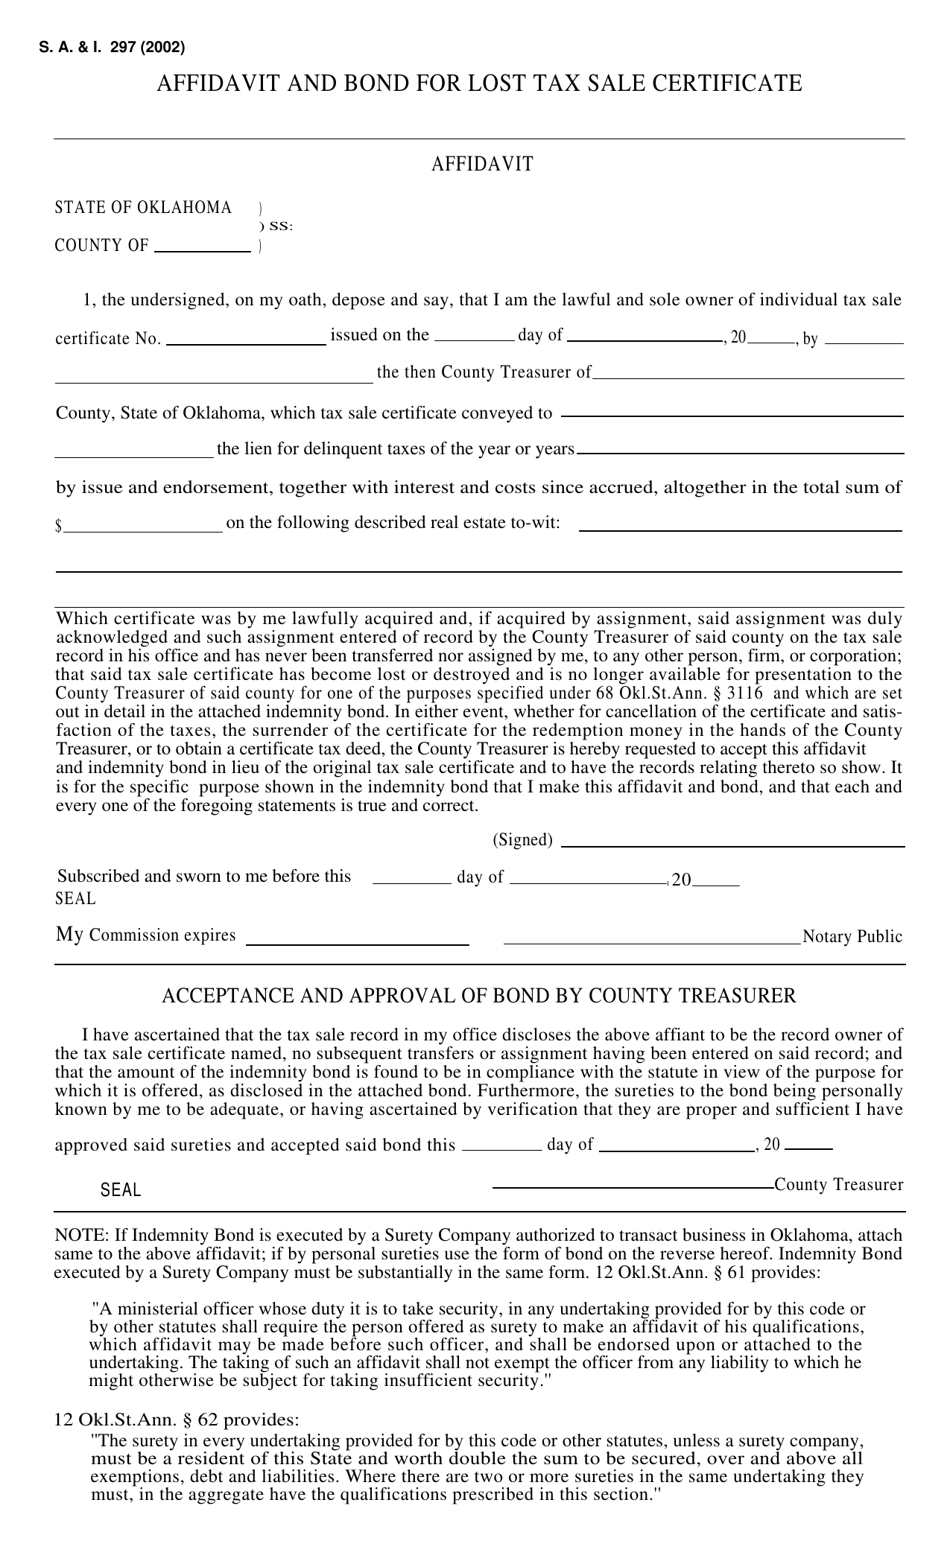 Form S.A. I.297 Affidavit and Bond for Lost Tax Sale Certificate - Oklahoma, Page 1